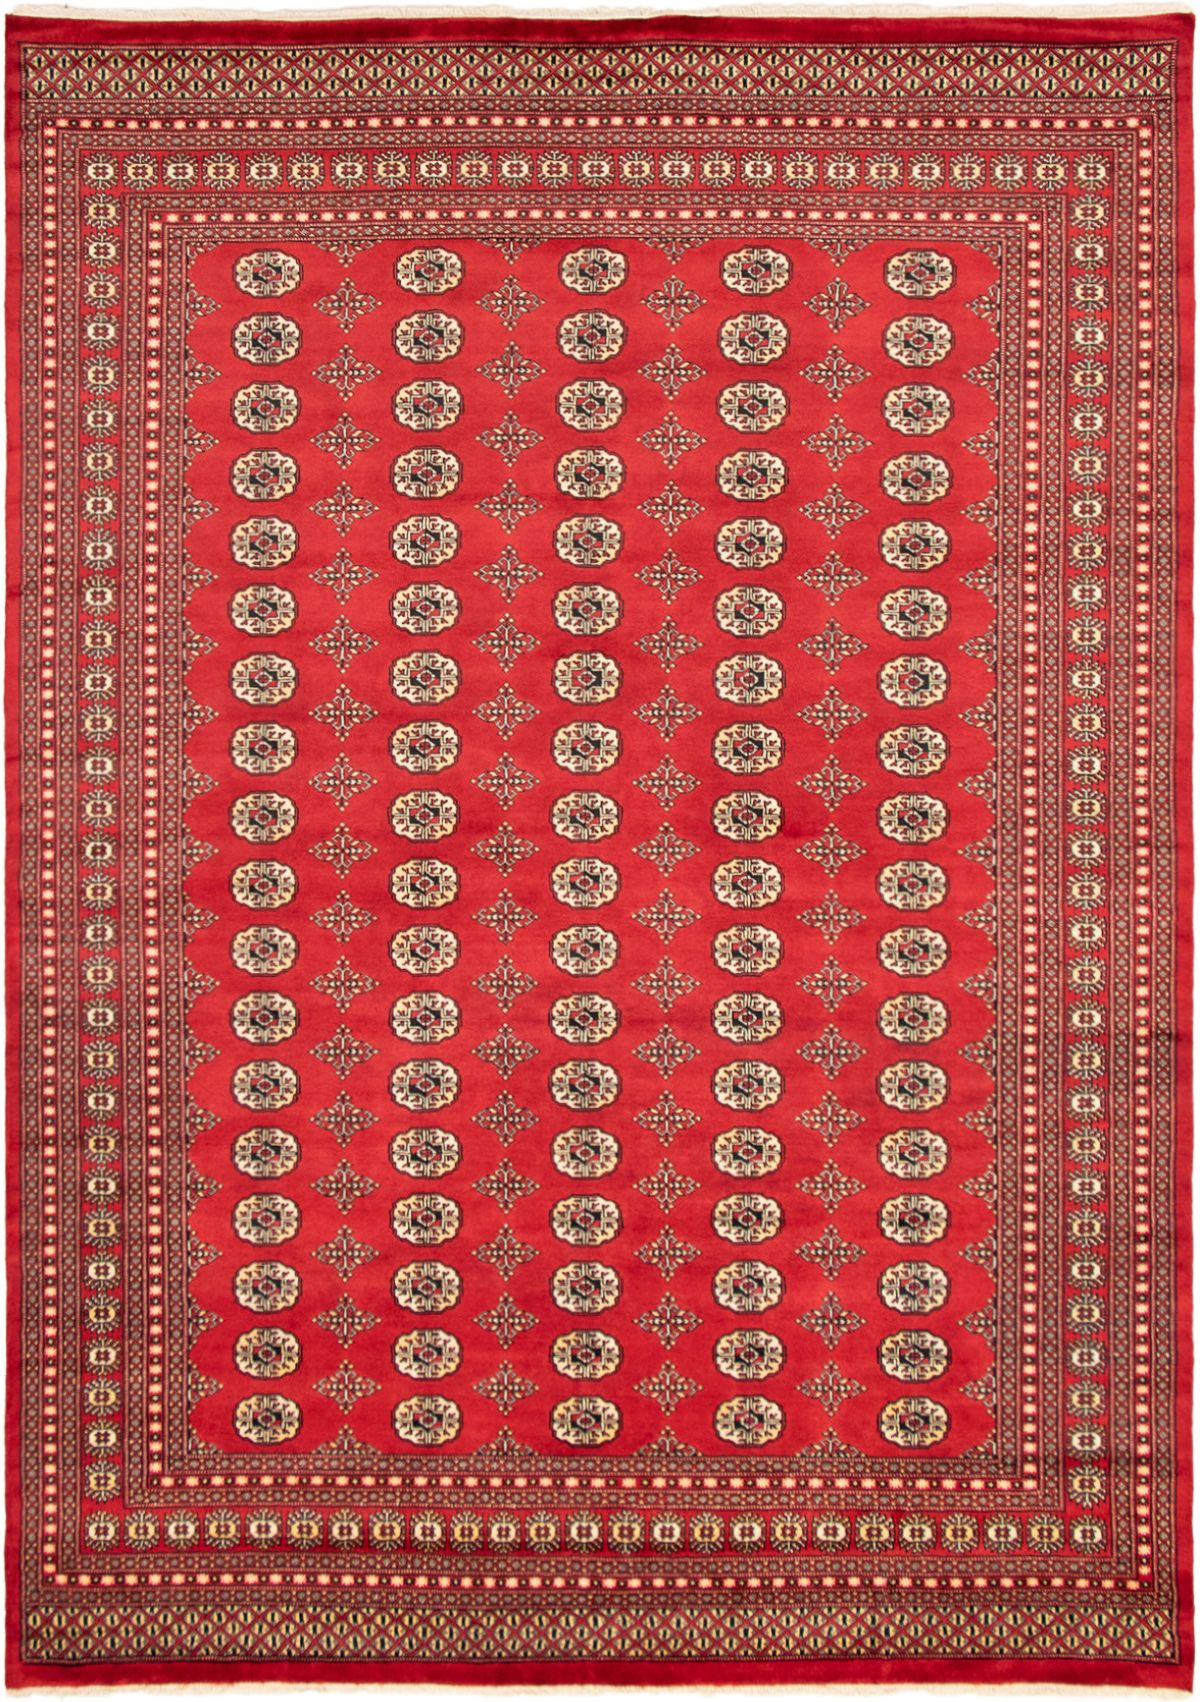 Hand-knotted Finest Peshawar Bokhara Red Wool Rug 8'2" x 9'9"  Size: 8'2" x 9'9"  